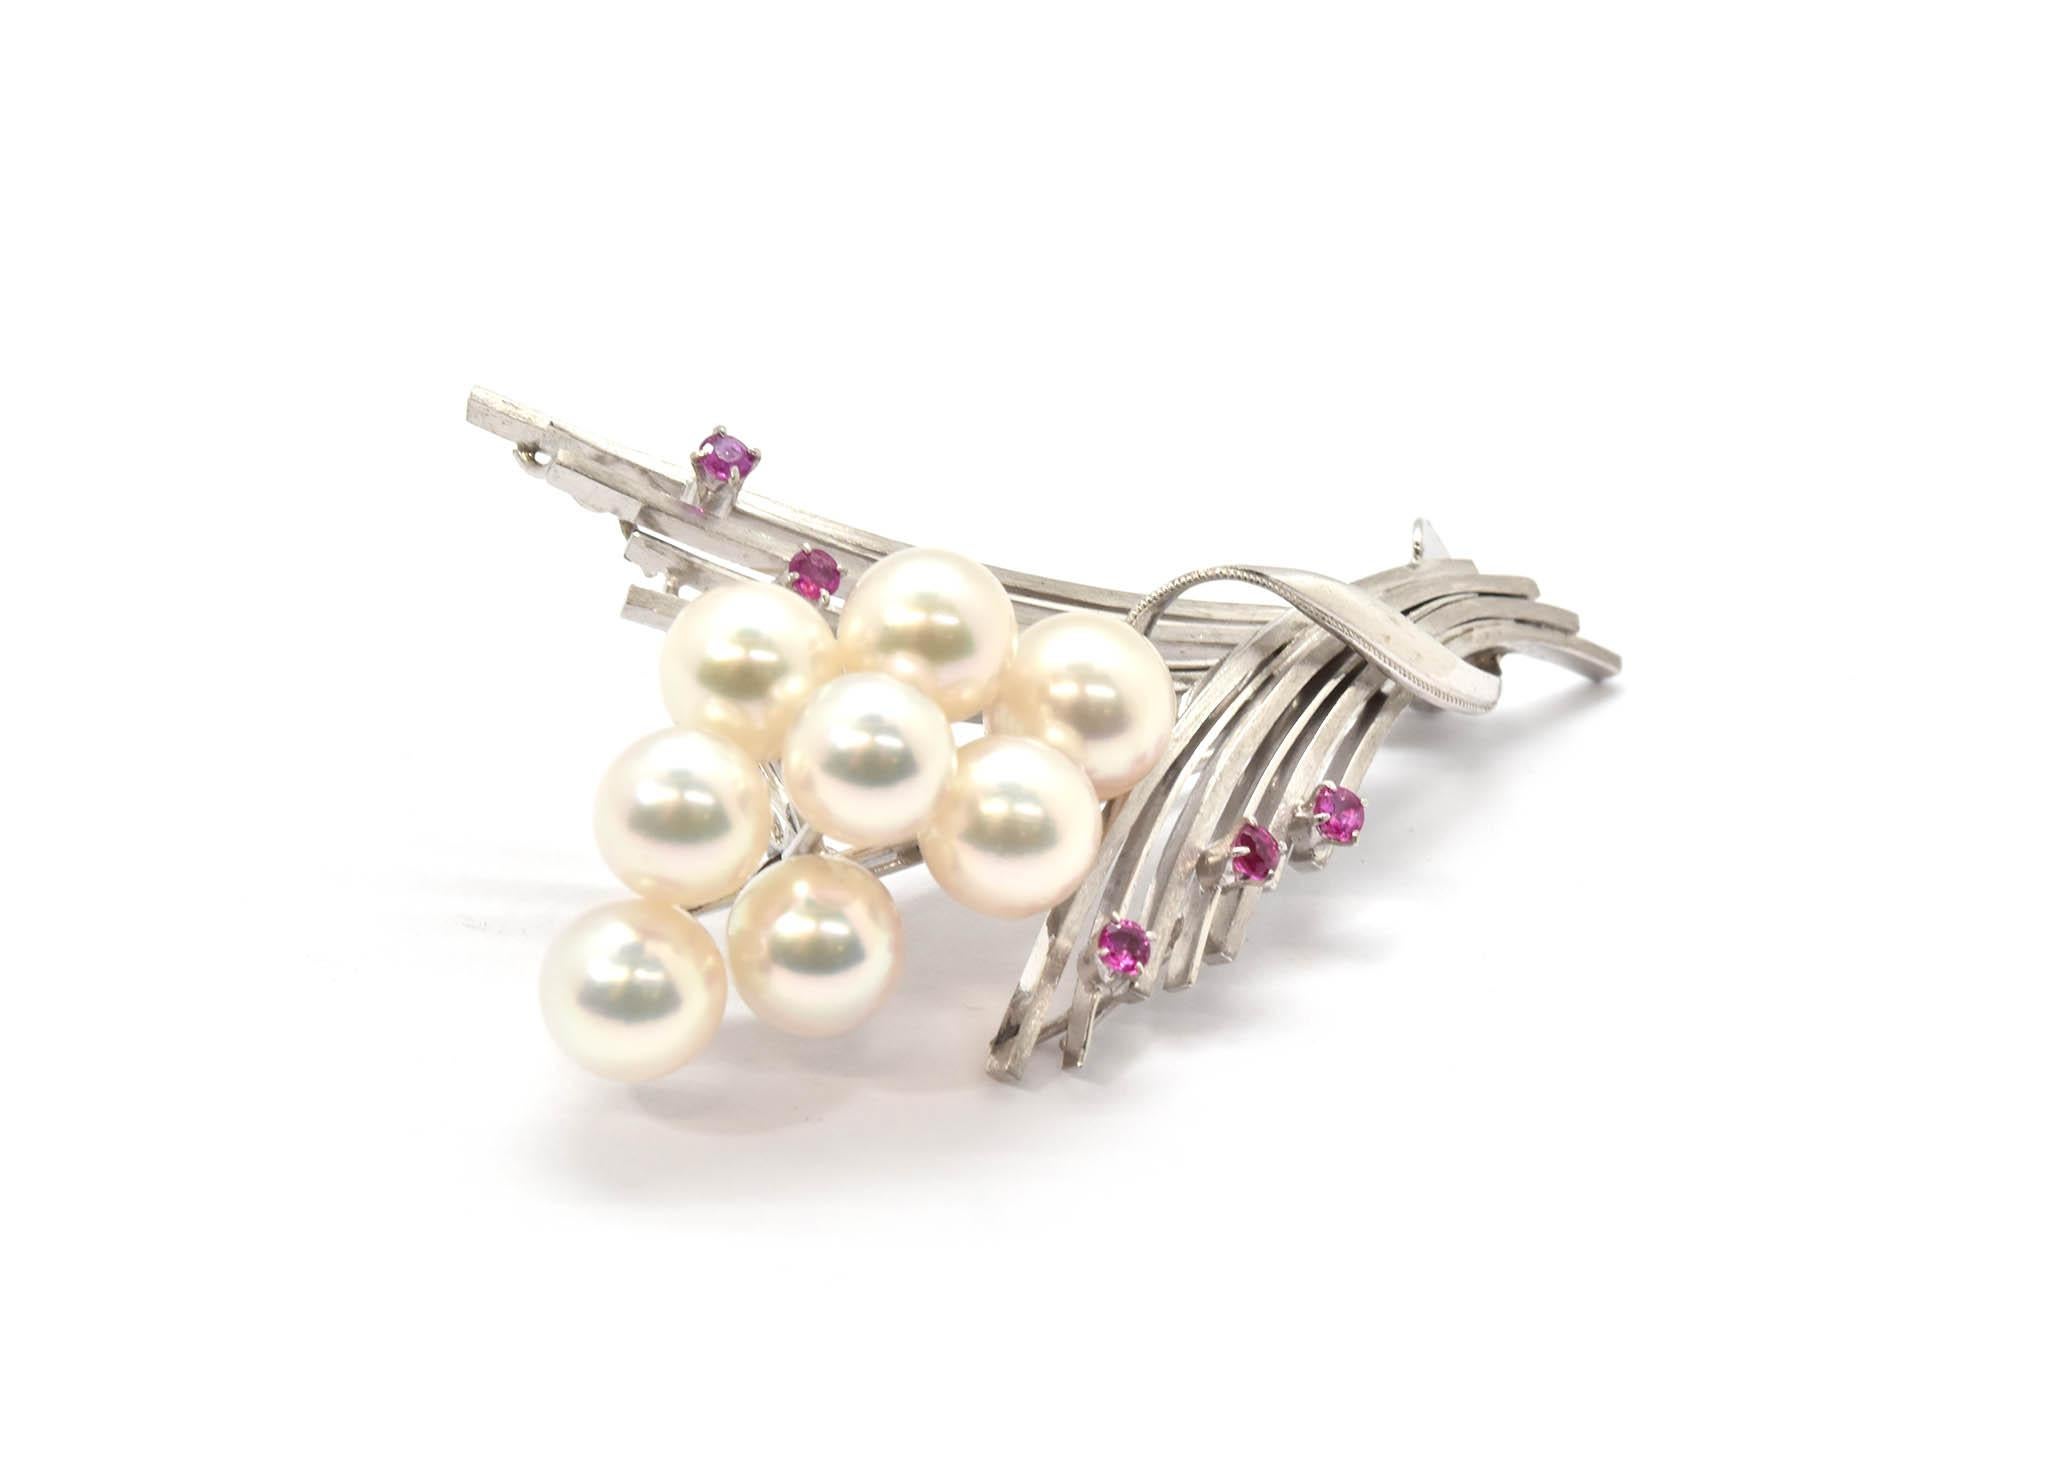 This creatively made flower pin is made with style! This pin is designed with a fabulous high polished finish, with a wrapping design made with an etched trim and rubies set at the top of the white gold flower strands. Each pearl is mounted